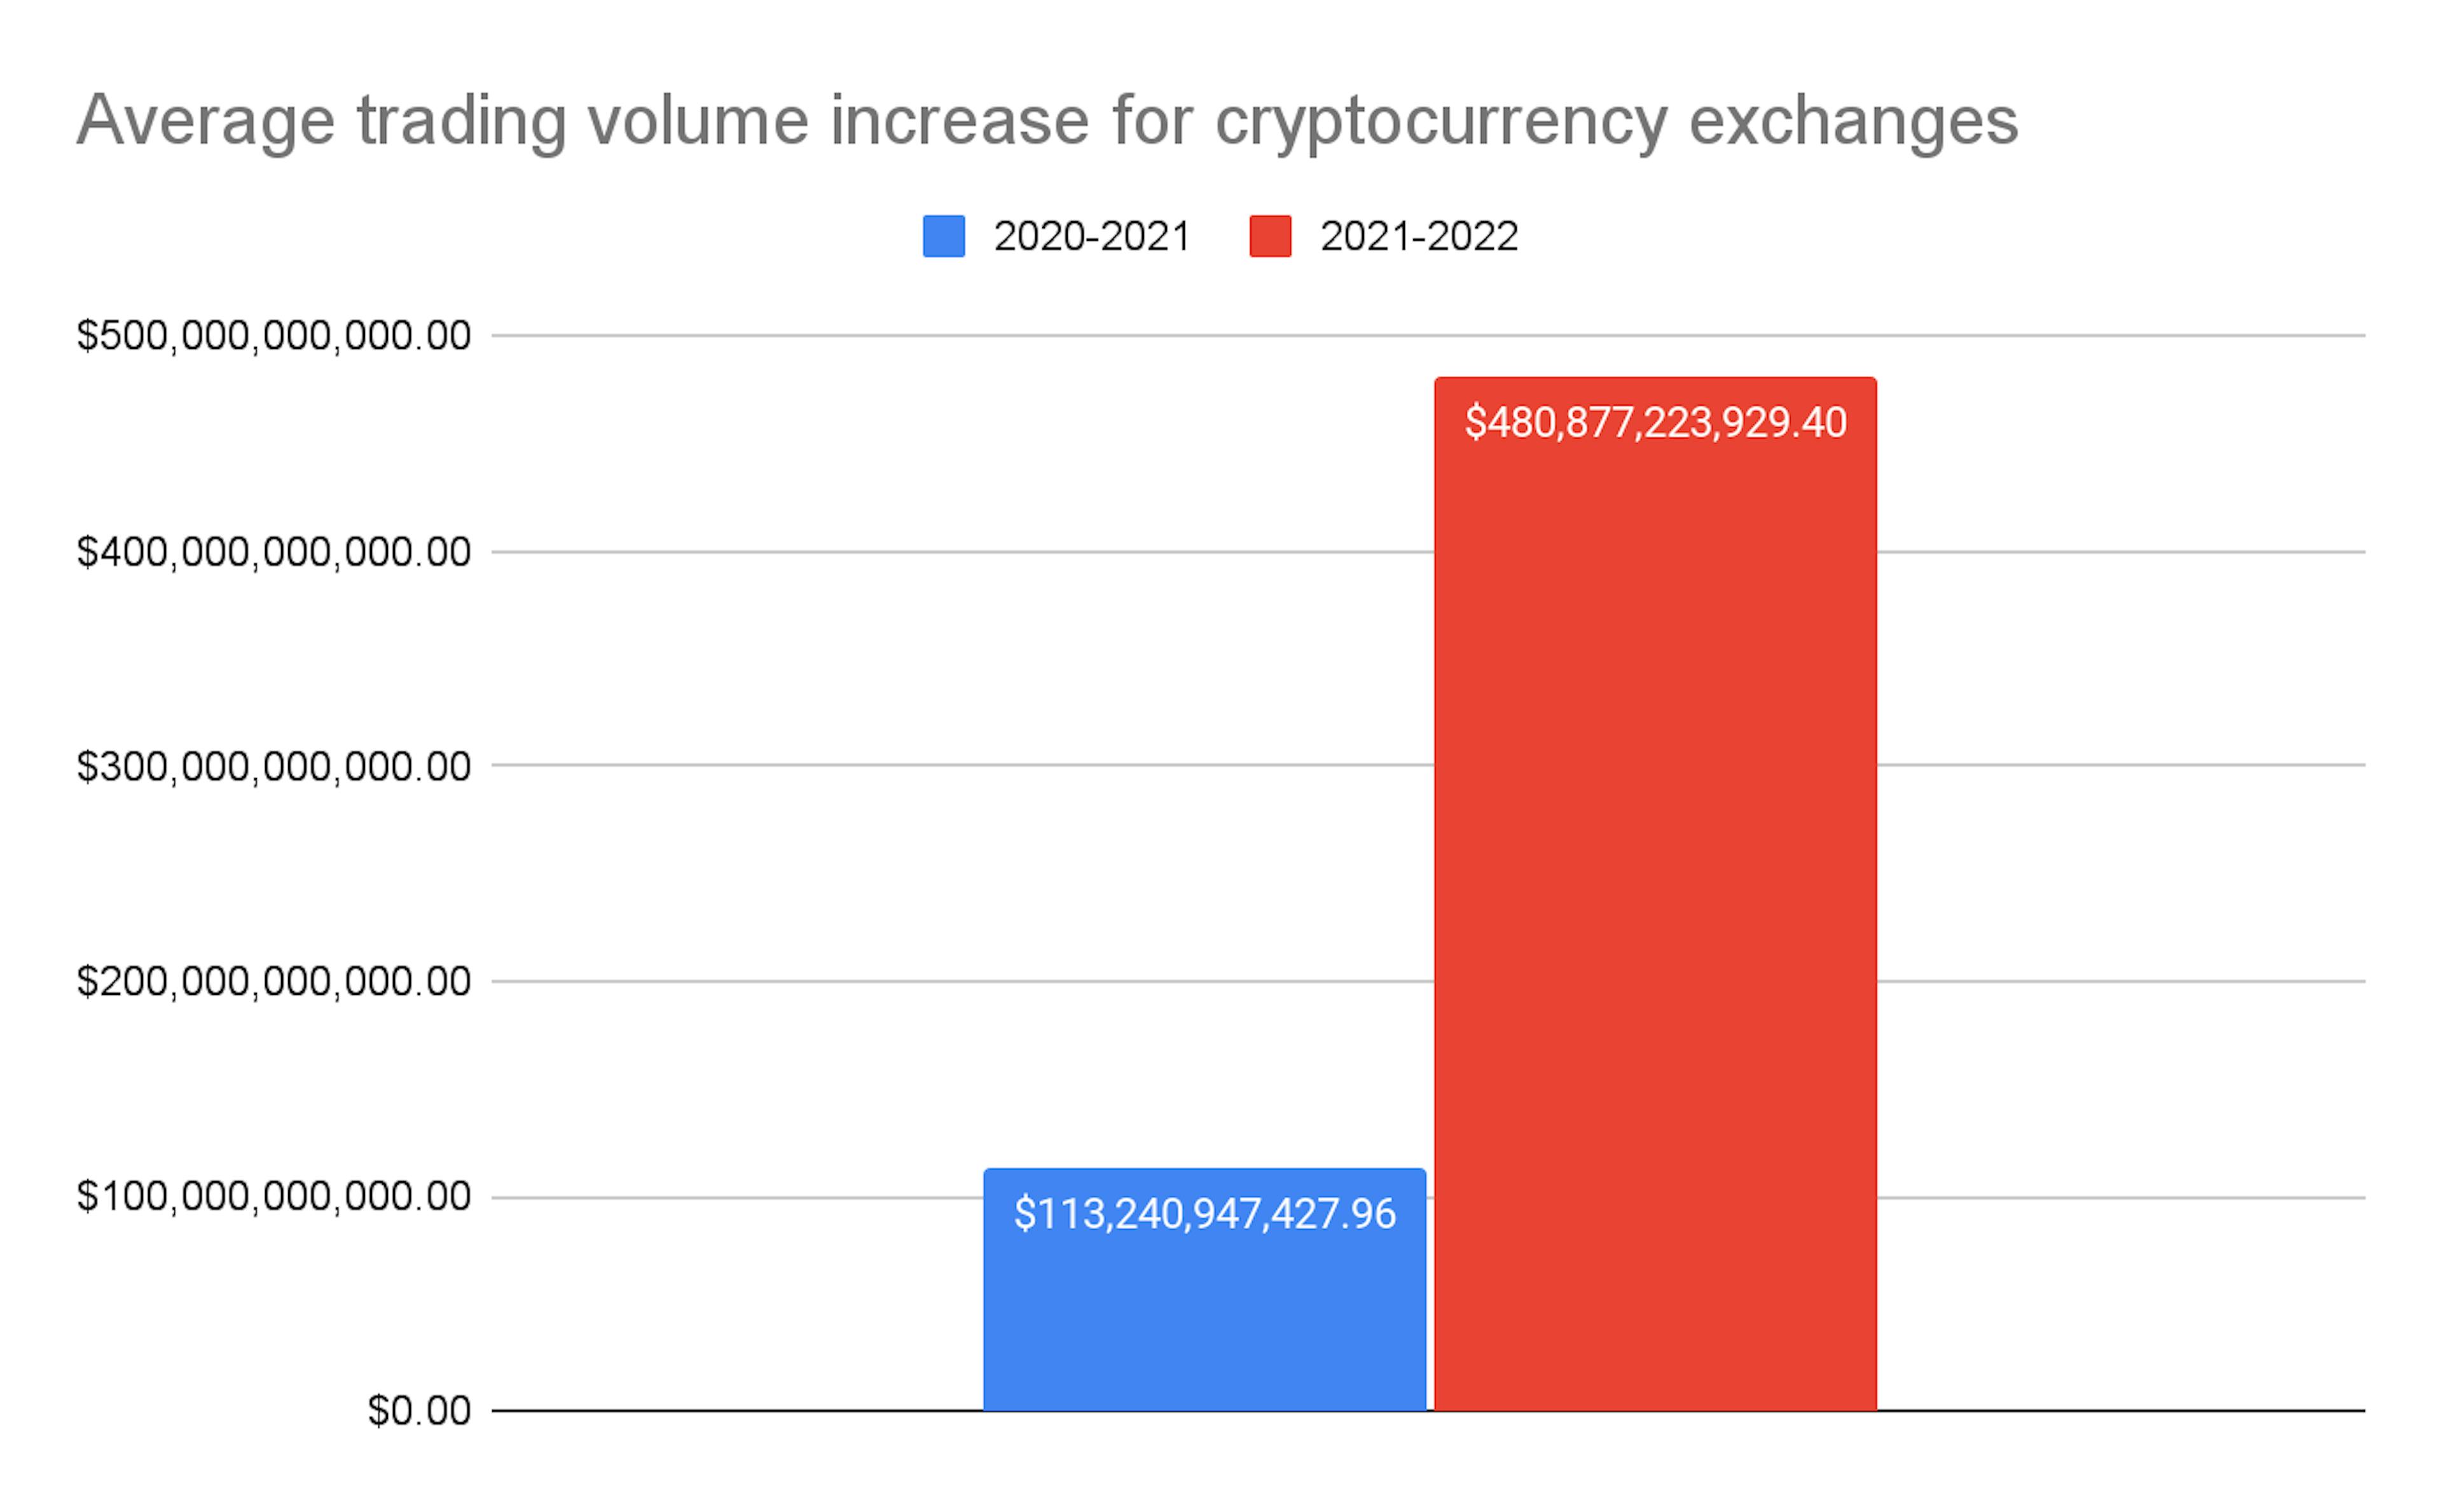 Average trading volume for cryptocurrency exchanges between 2020-2022